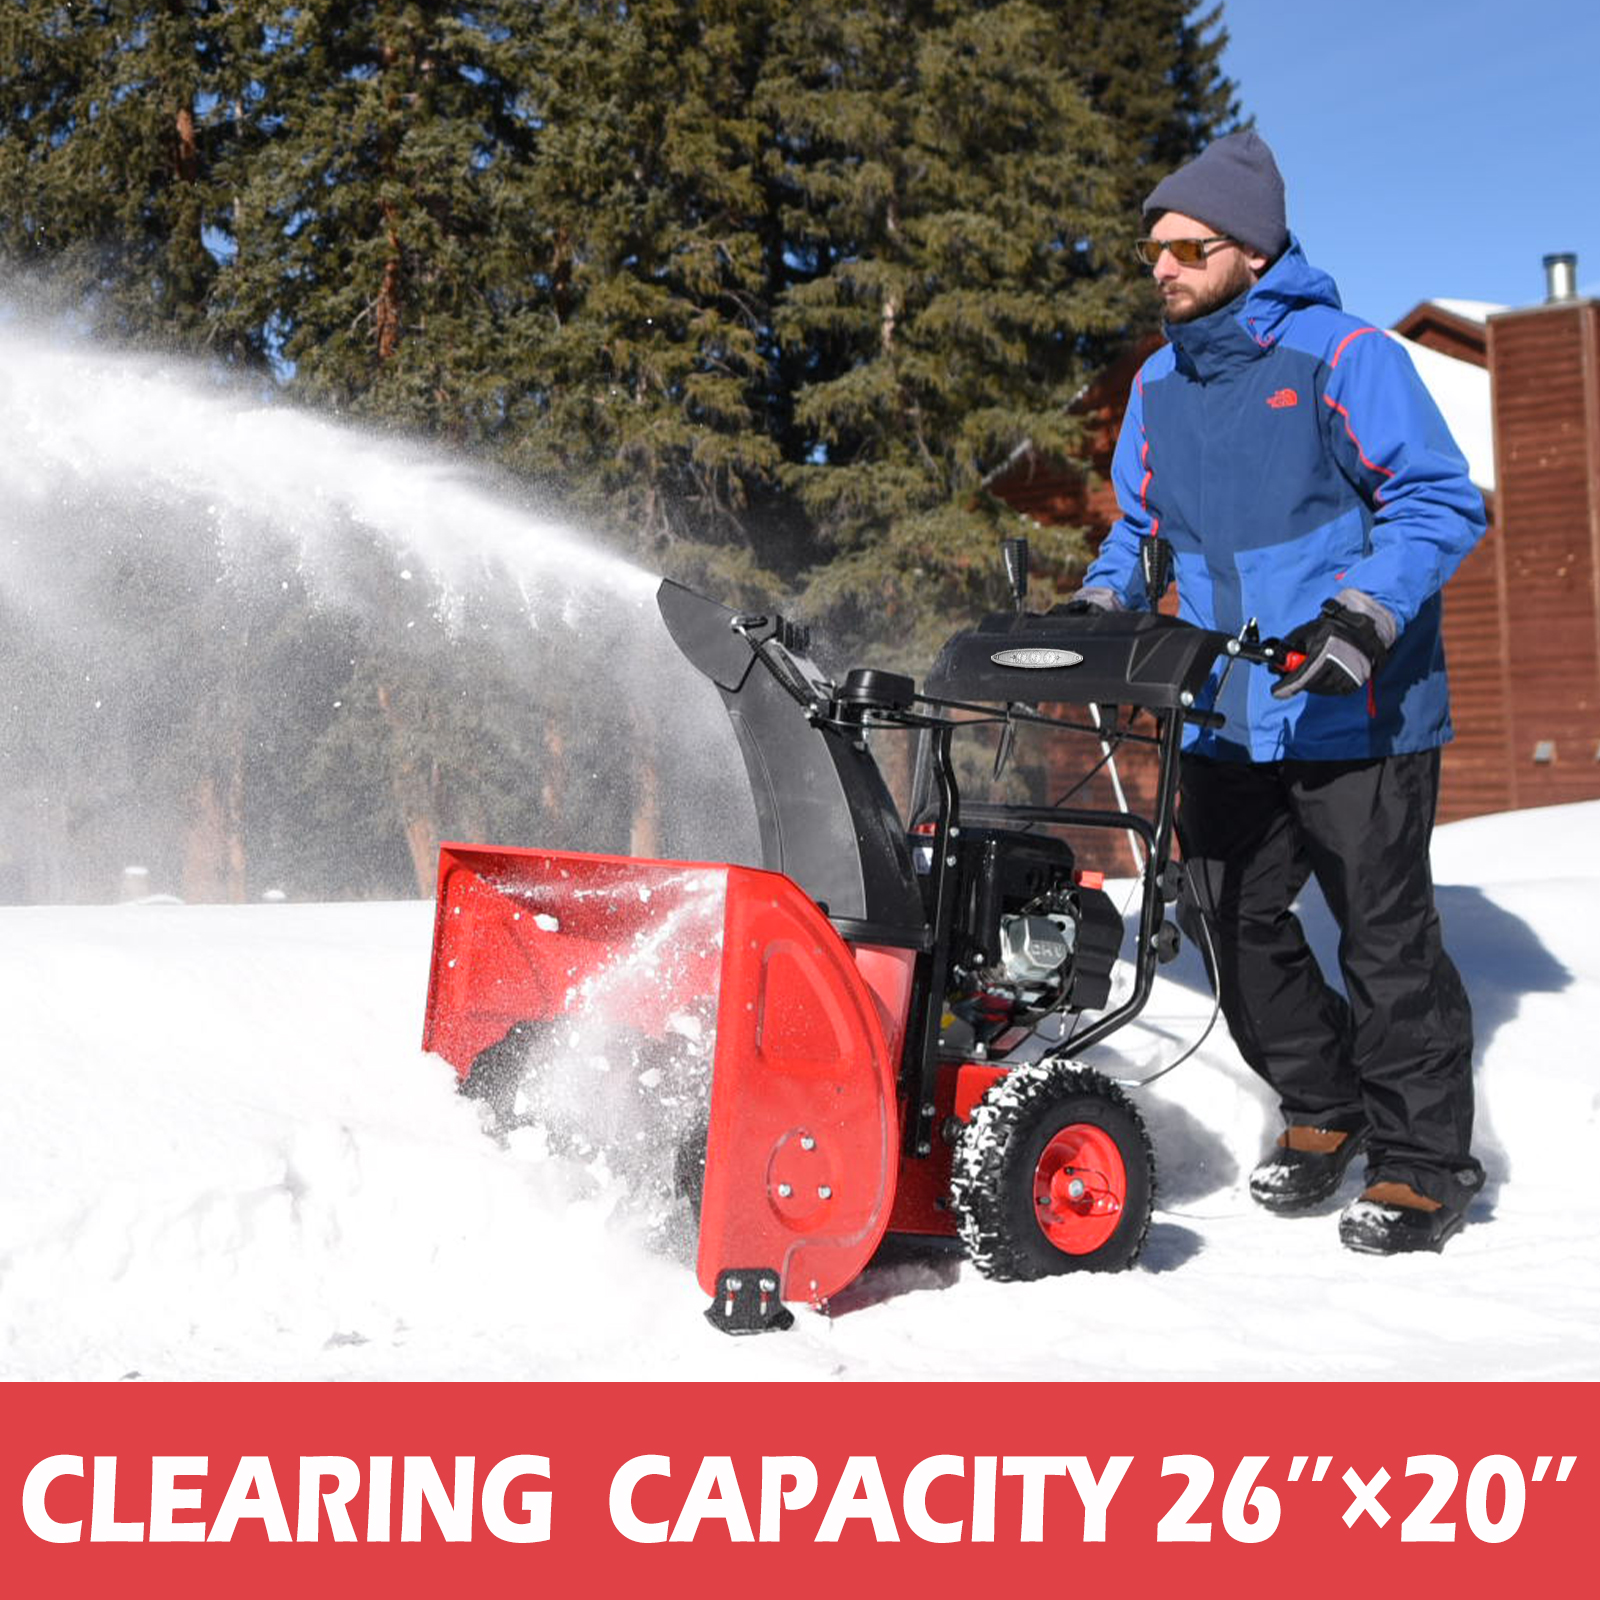 PowerSmart 26 in. Two-Stage Electric Start 252CC Self Propelled Gas Snow Blower - image 2 of 5